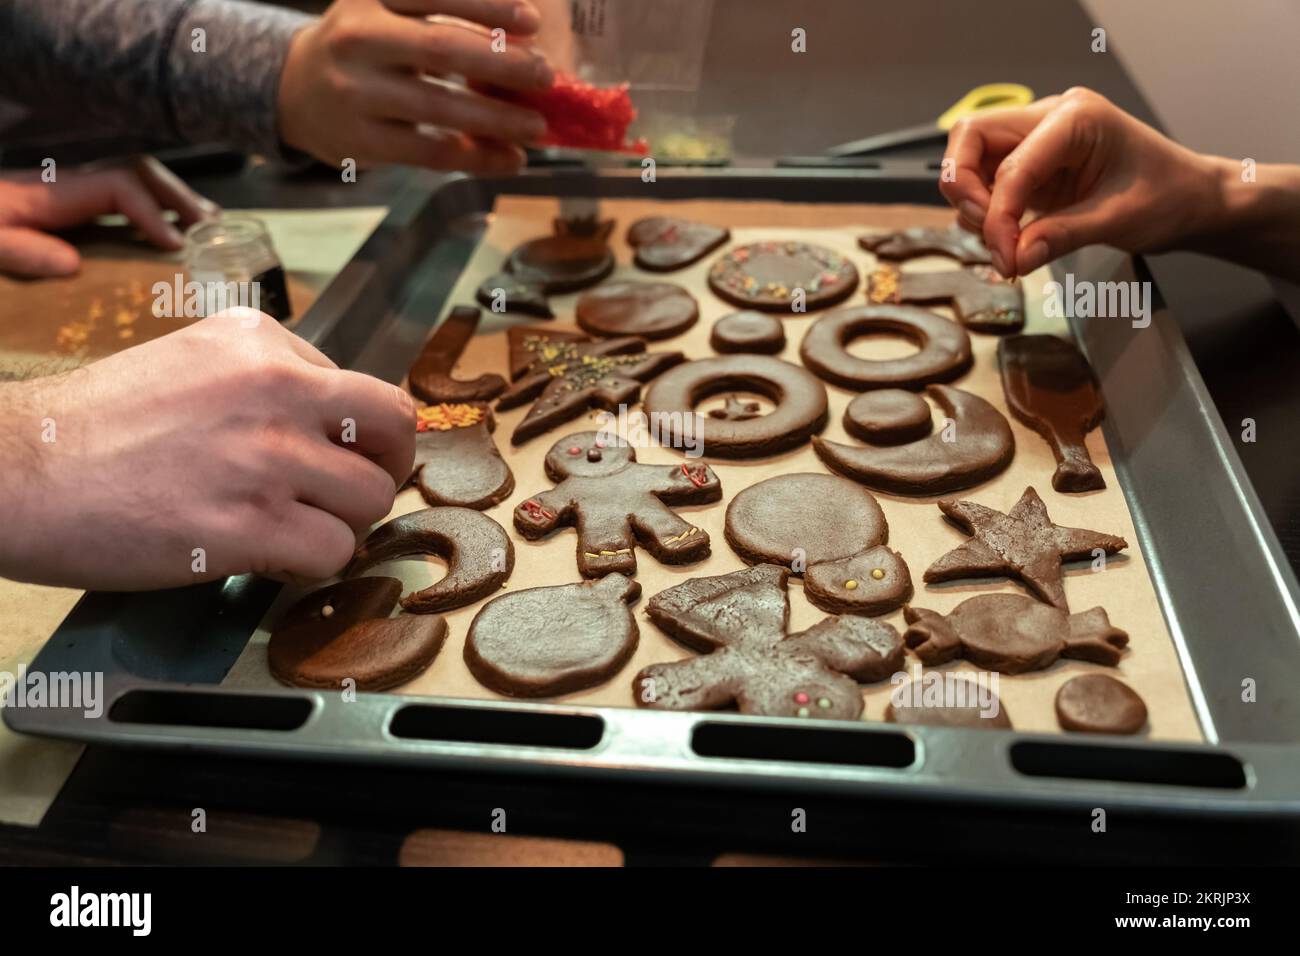 A group of friends gathered in the evening and spend time together cooking gingerbread cookies. Stock Photo